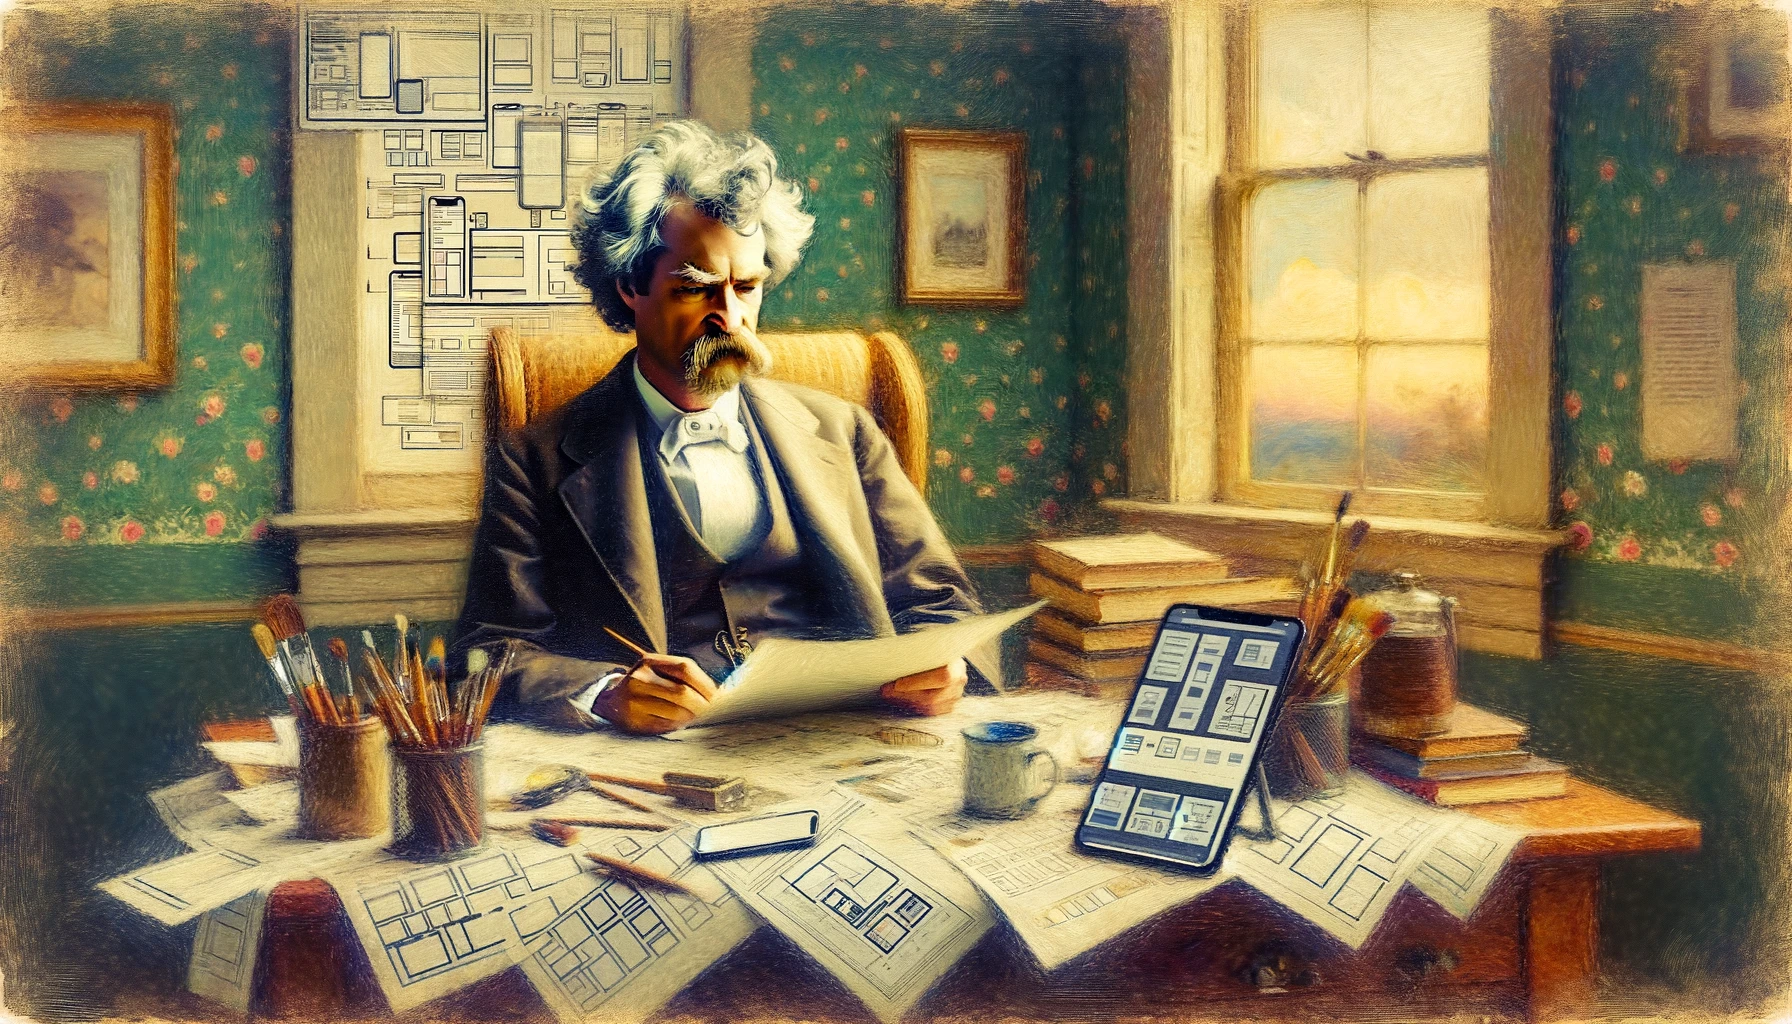 A painting in the impressionist style, depicting Mark Twain seated at a desk with UX design elements like wireframes, user interface sketches